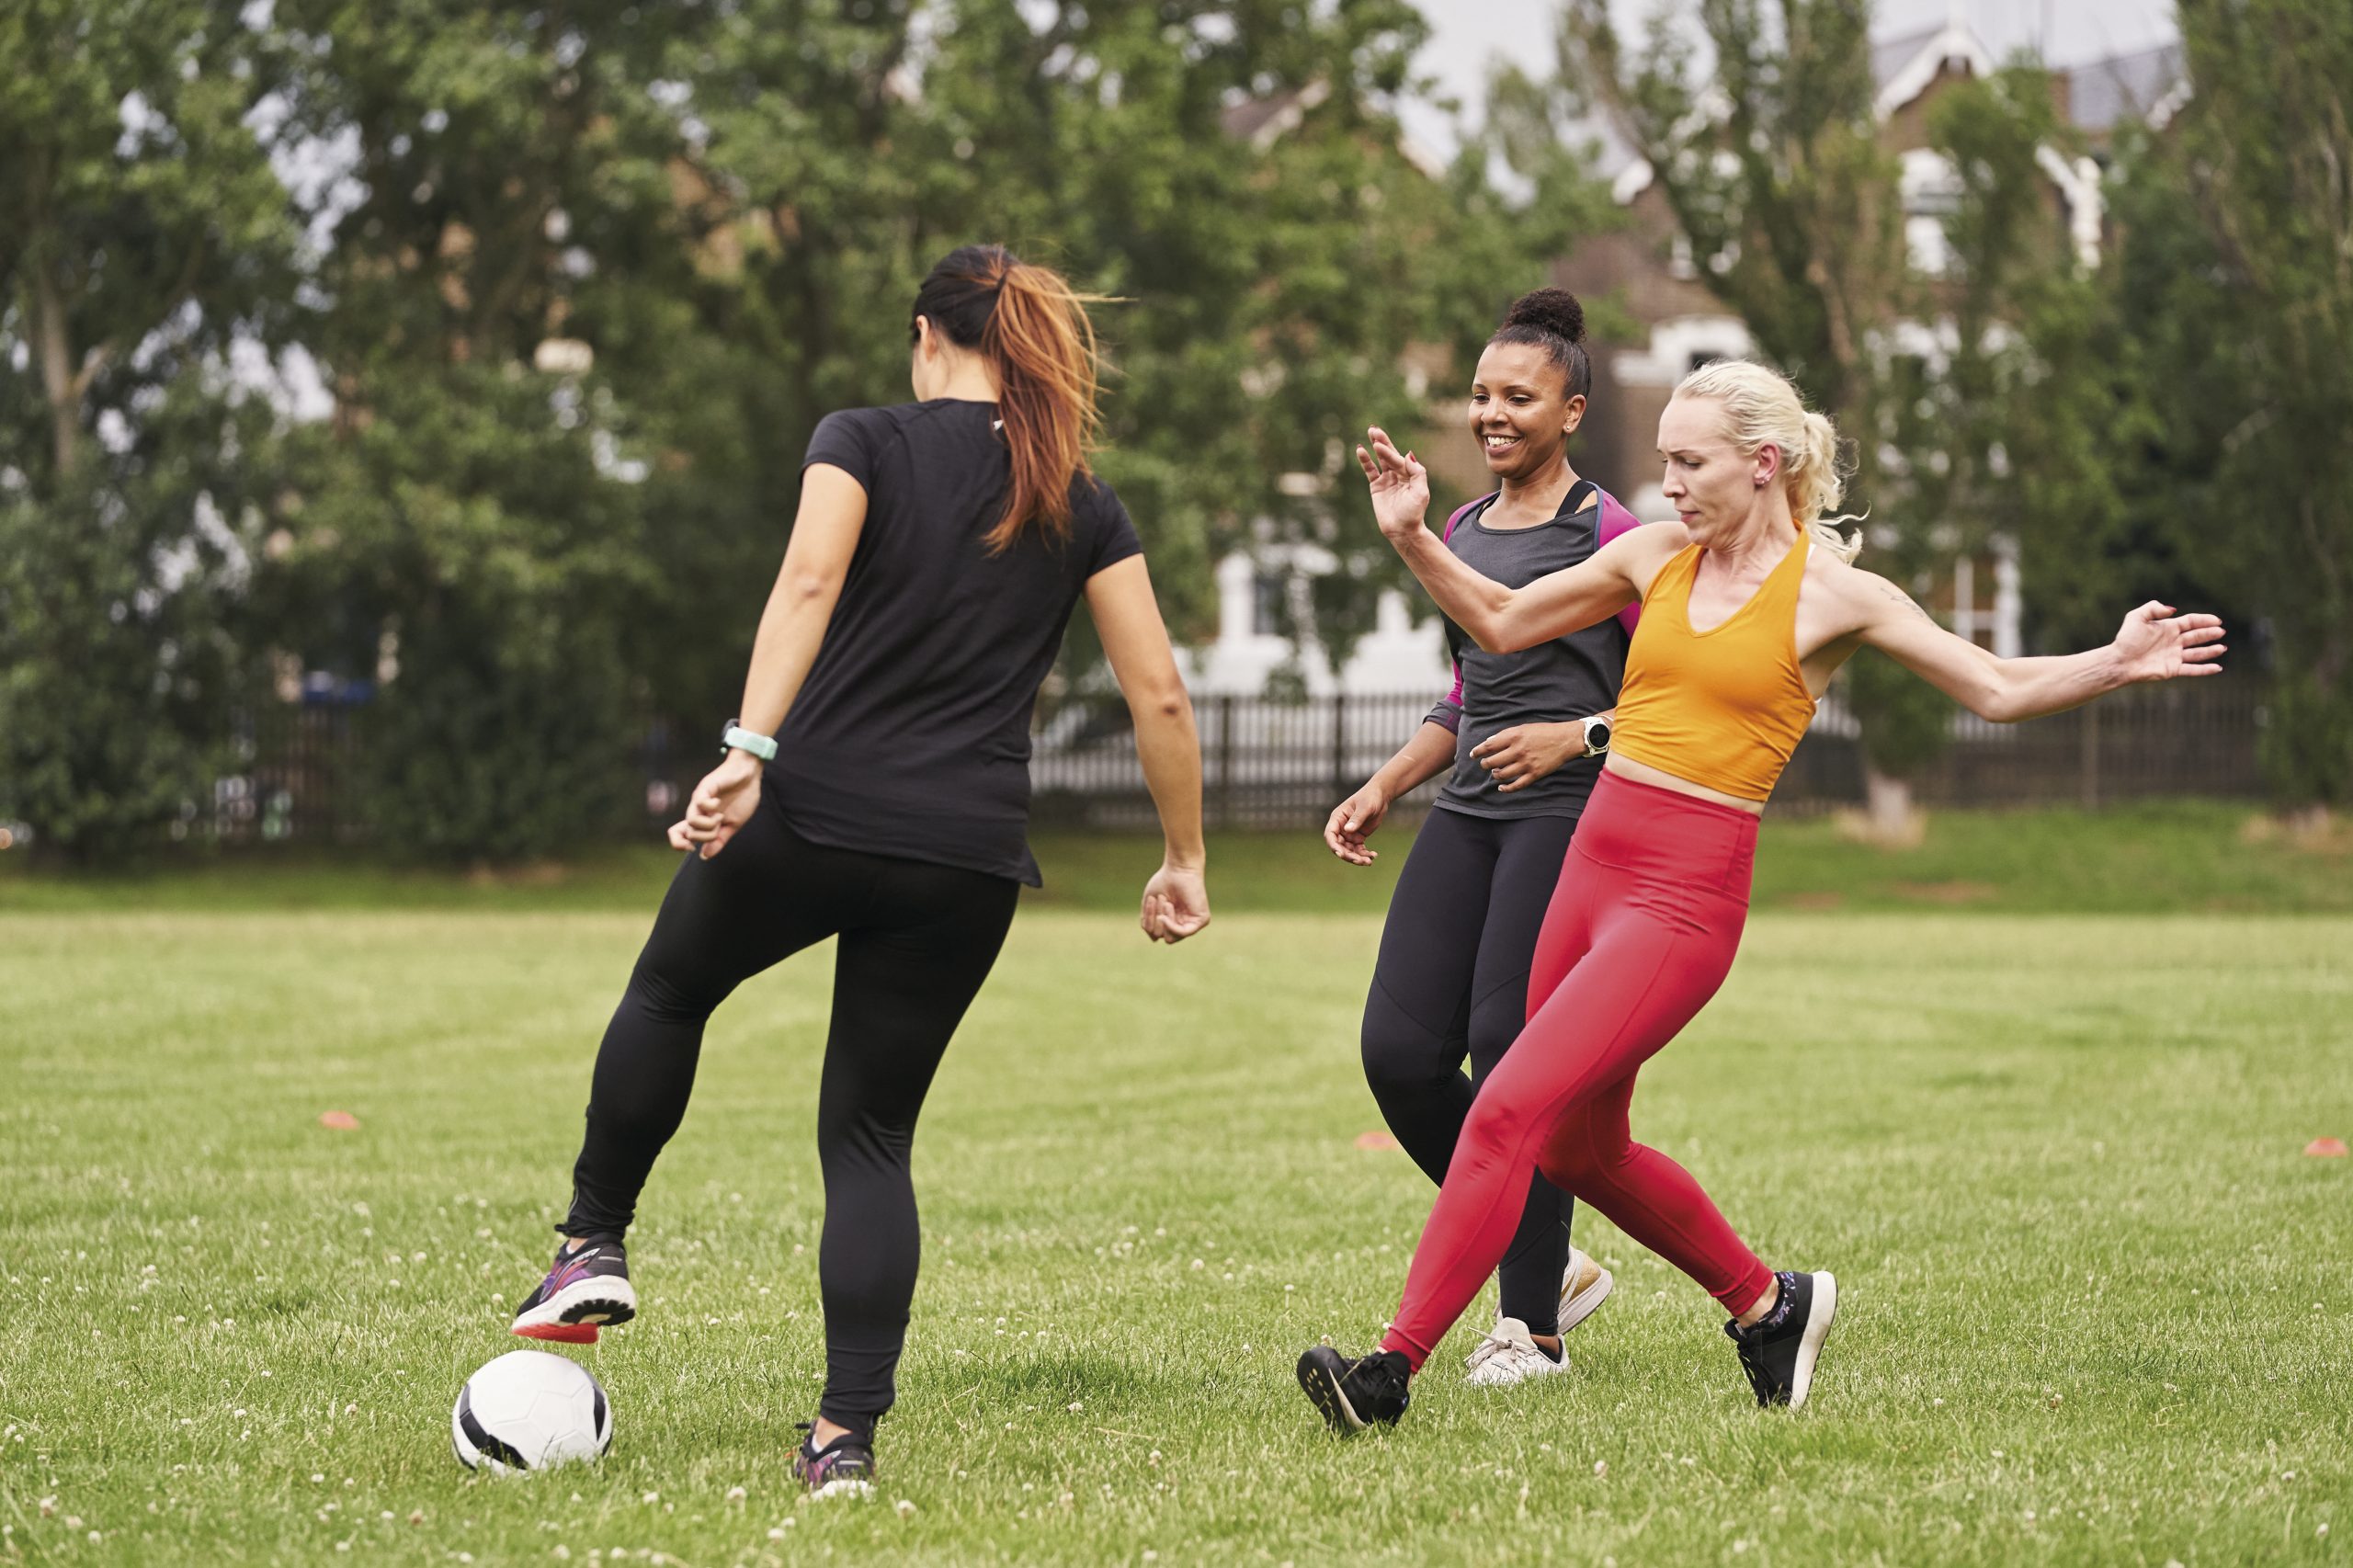 A group of women aged 34-55 playing football